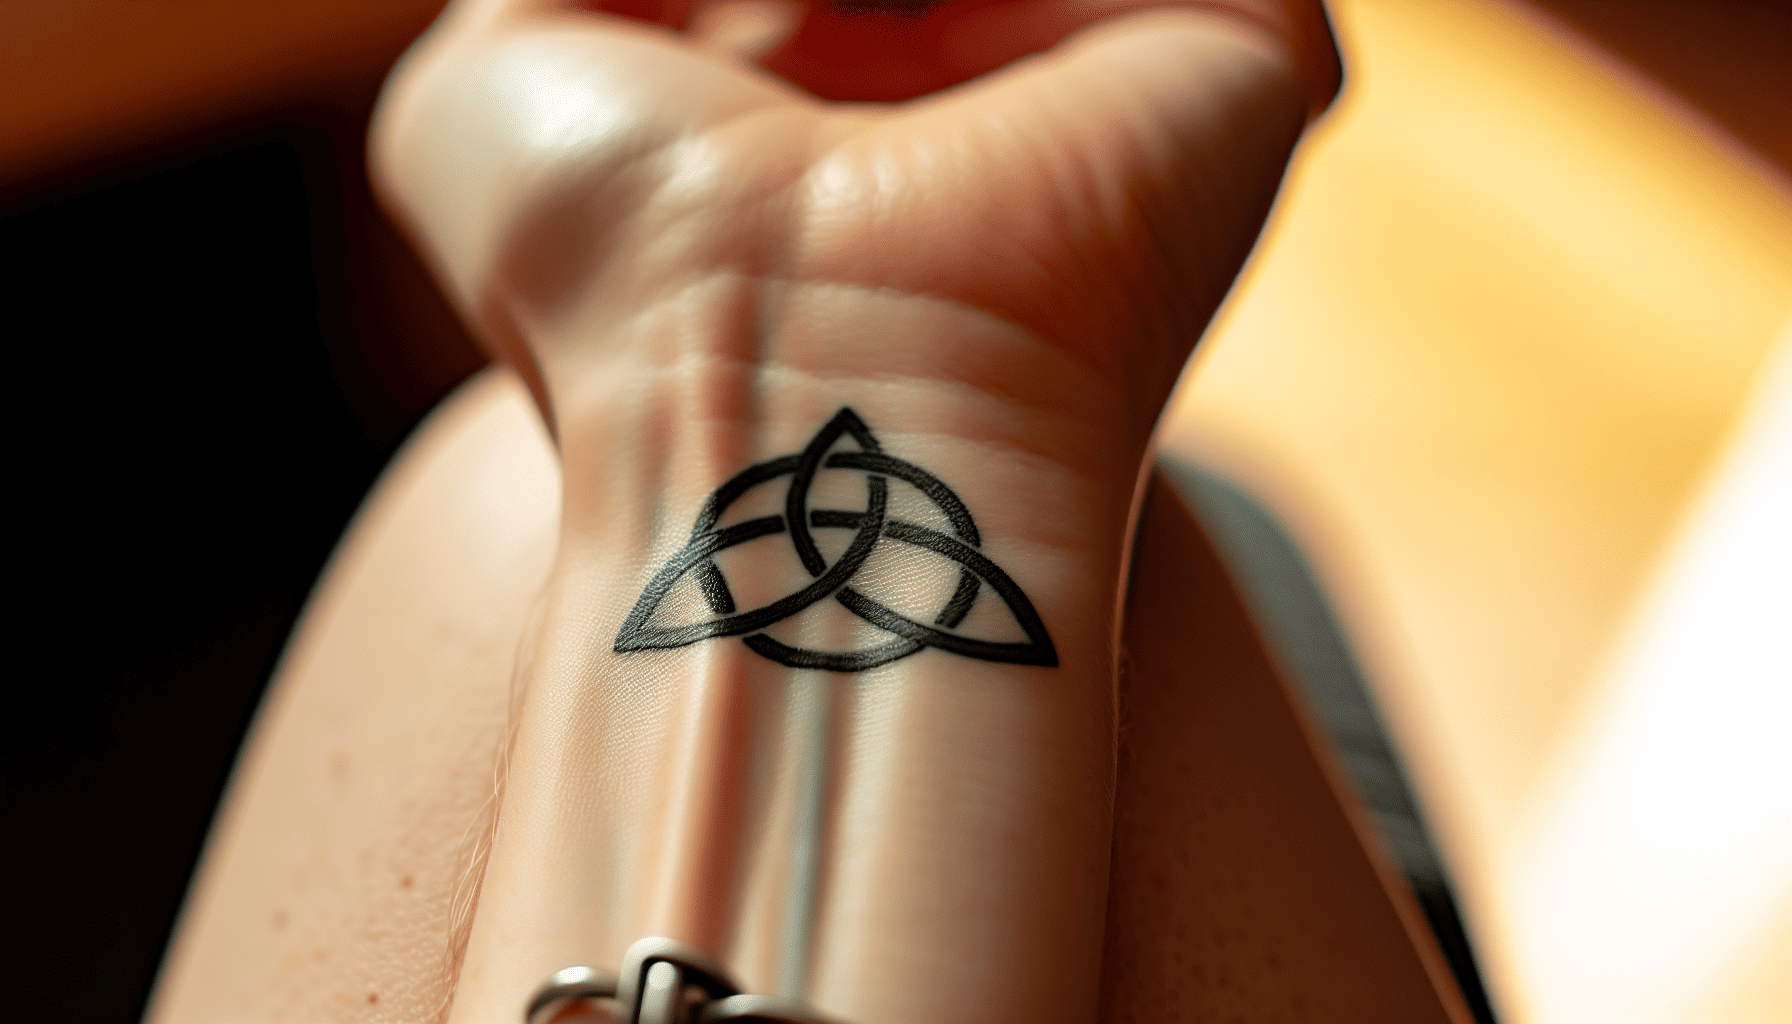 Close-up photo of a Triquetra tattoo on a person's wrist, showcasing modern revival of the symbol